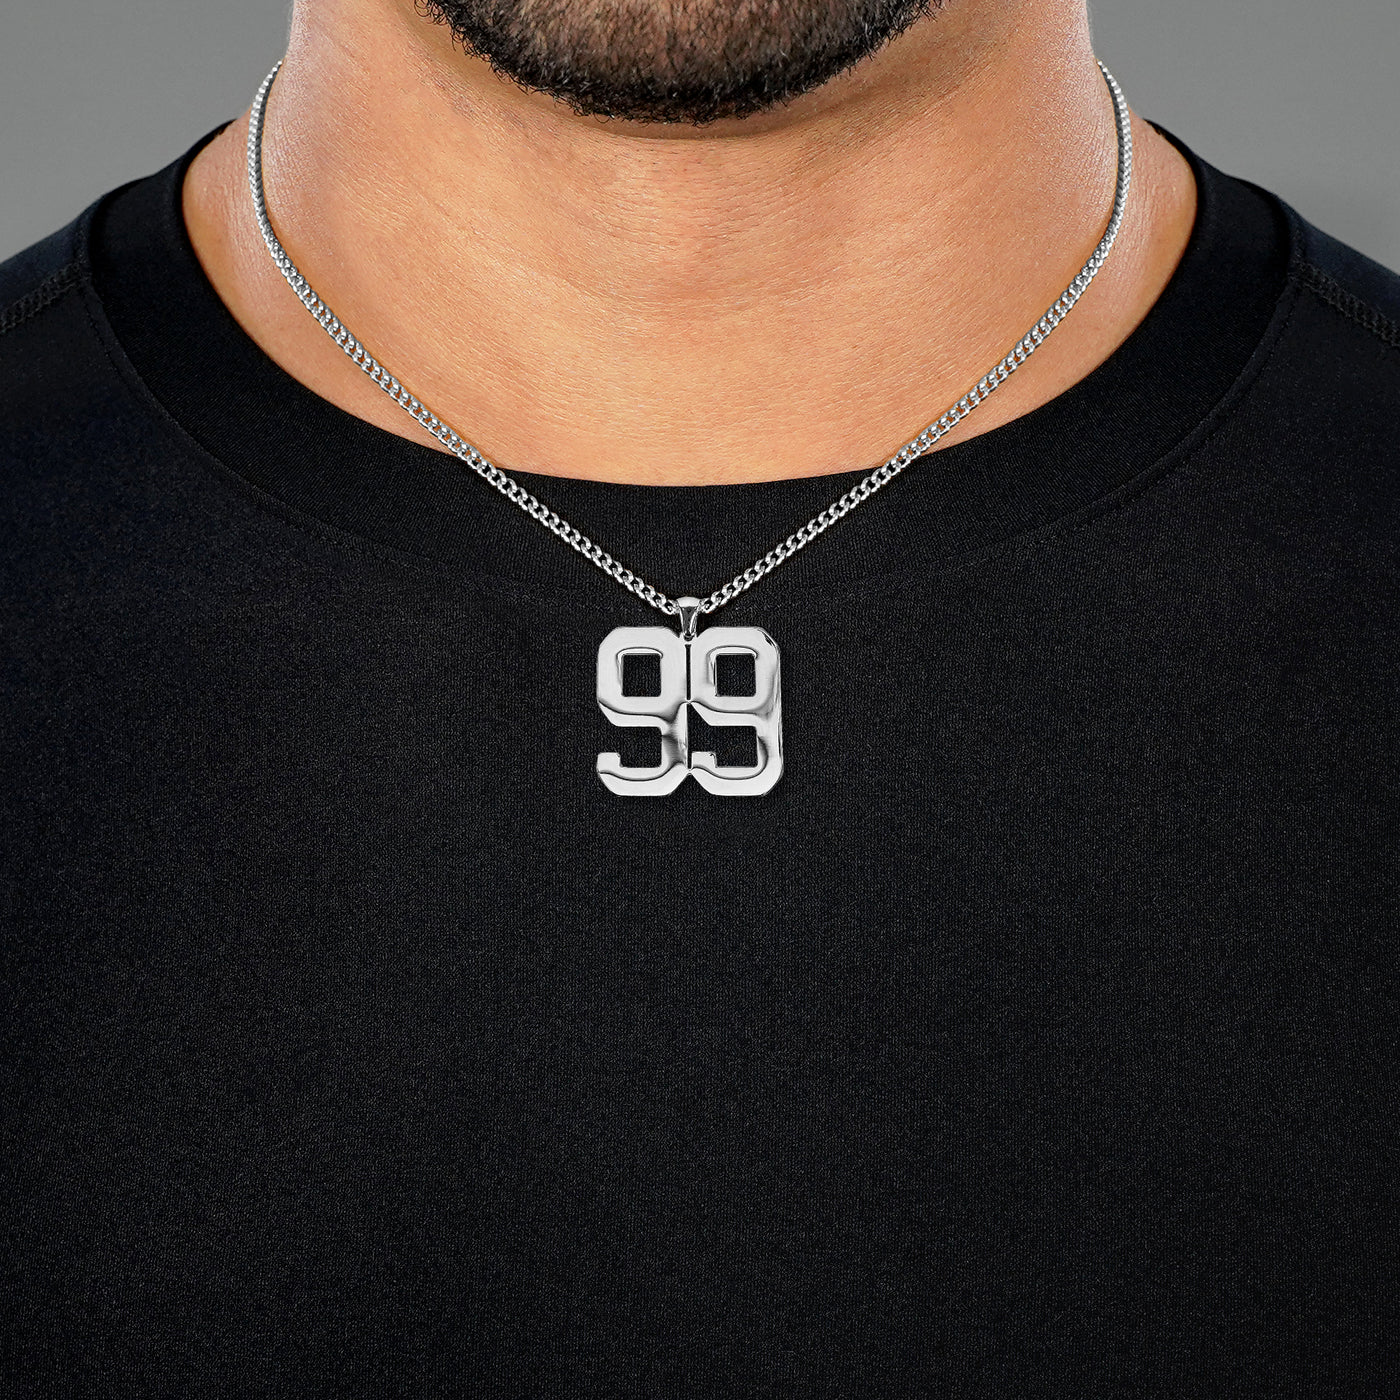 99 Number Pendant with Chain Necklace - Stainless Steel